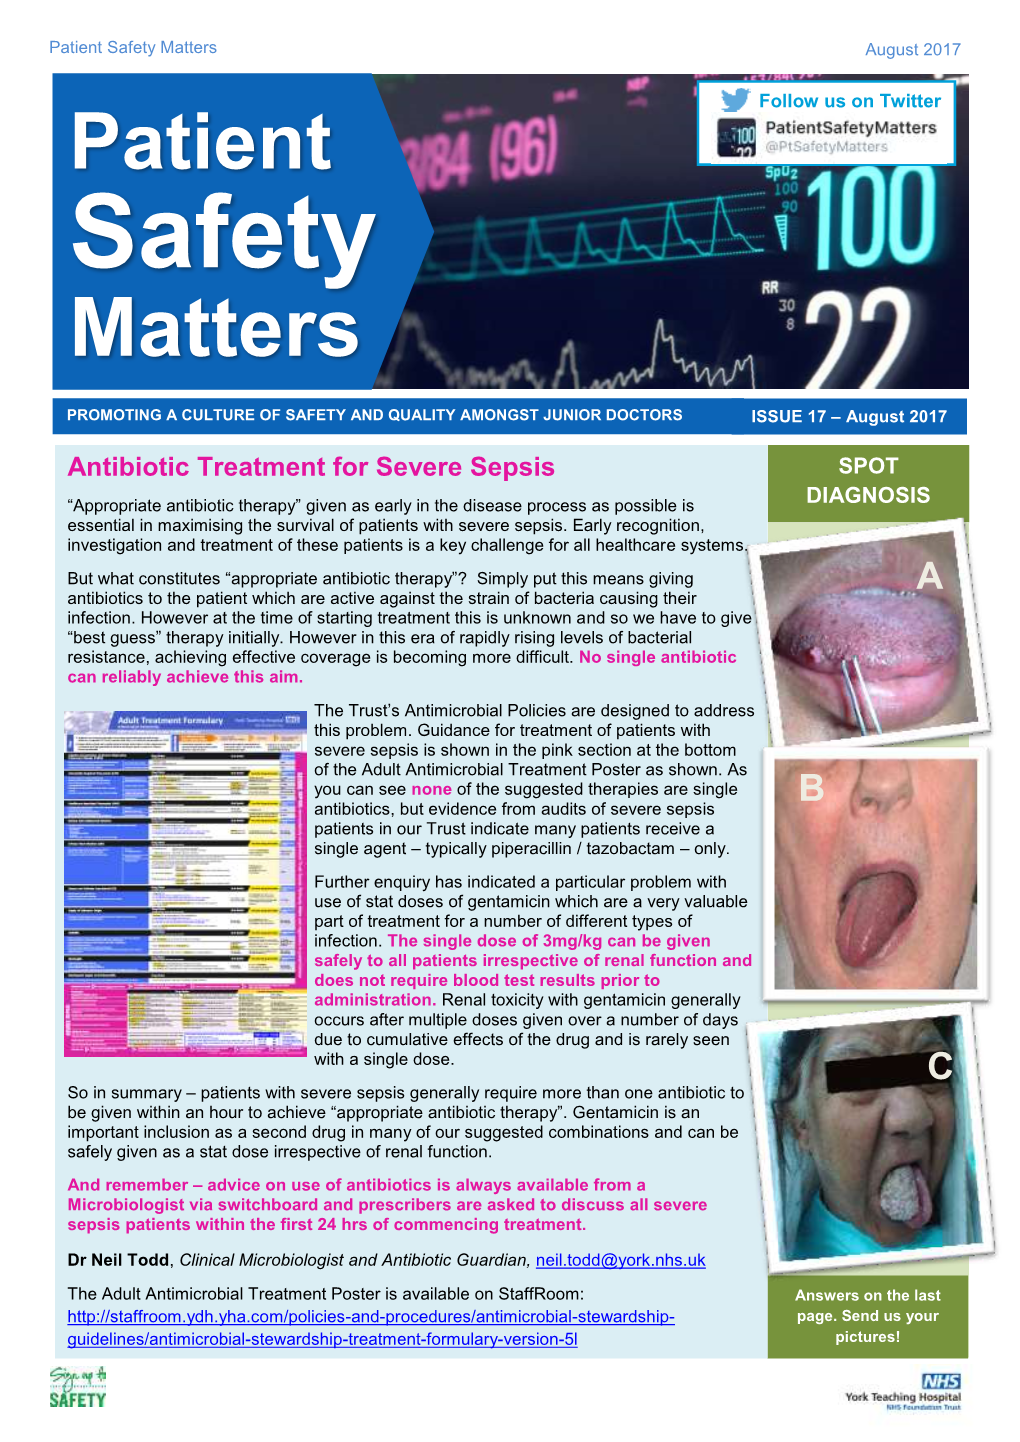 Safety Matters August 2017